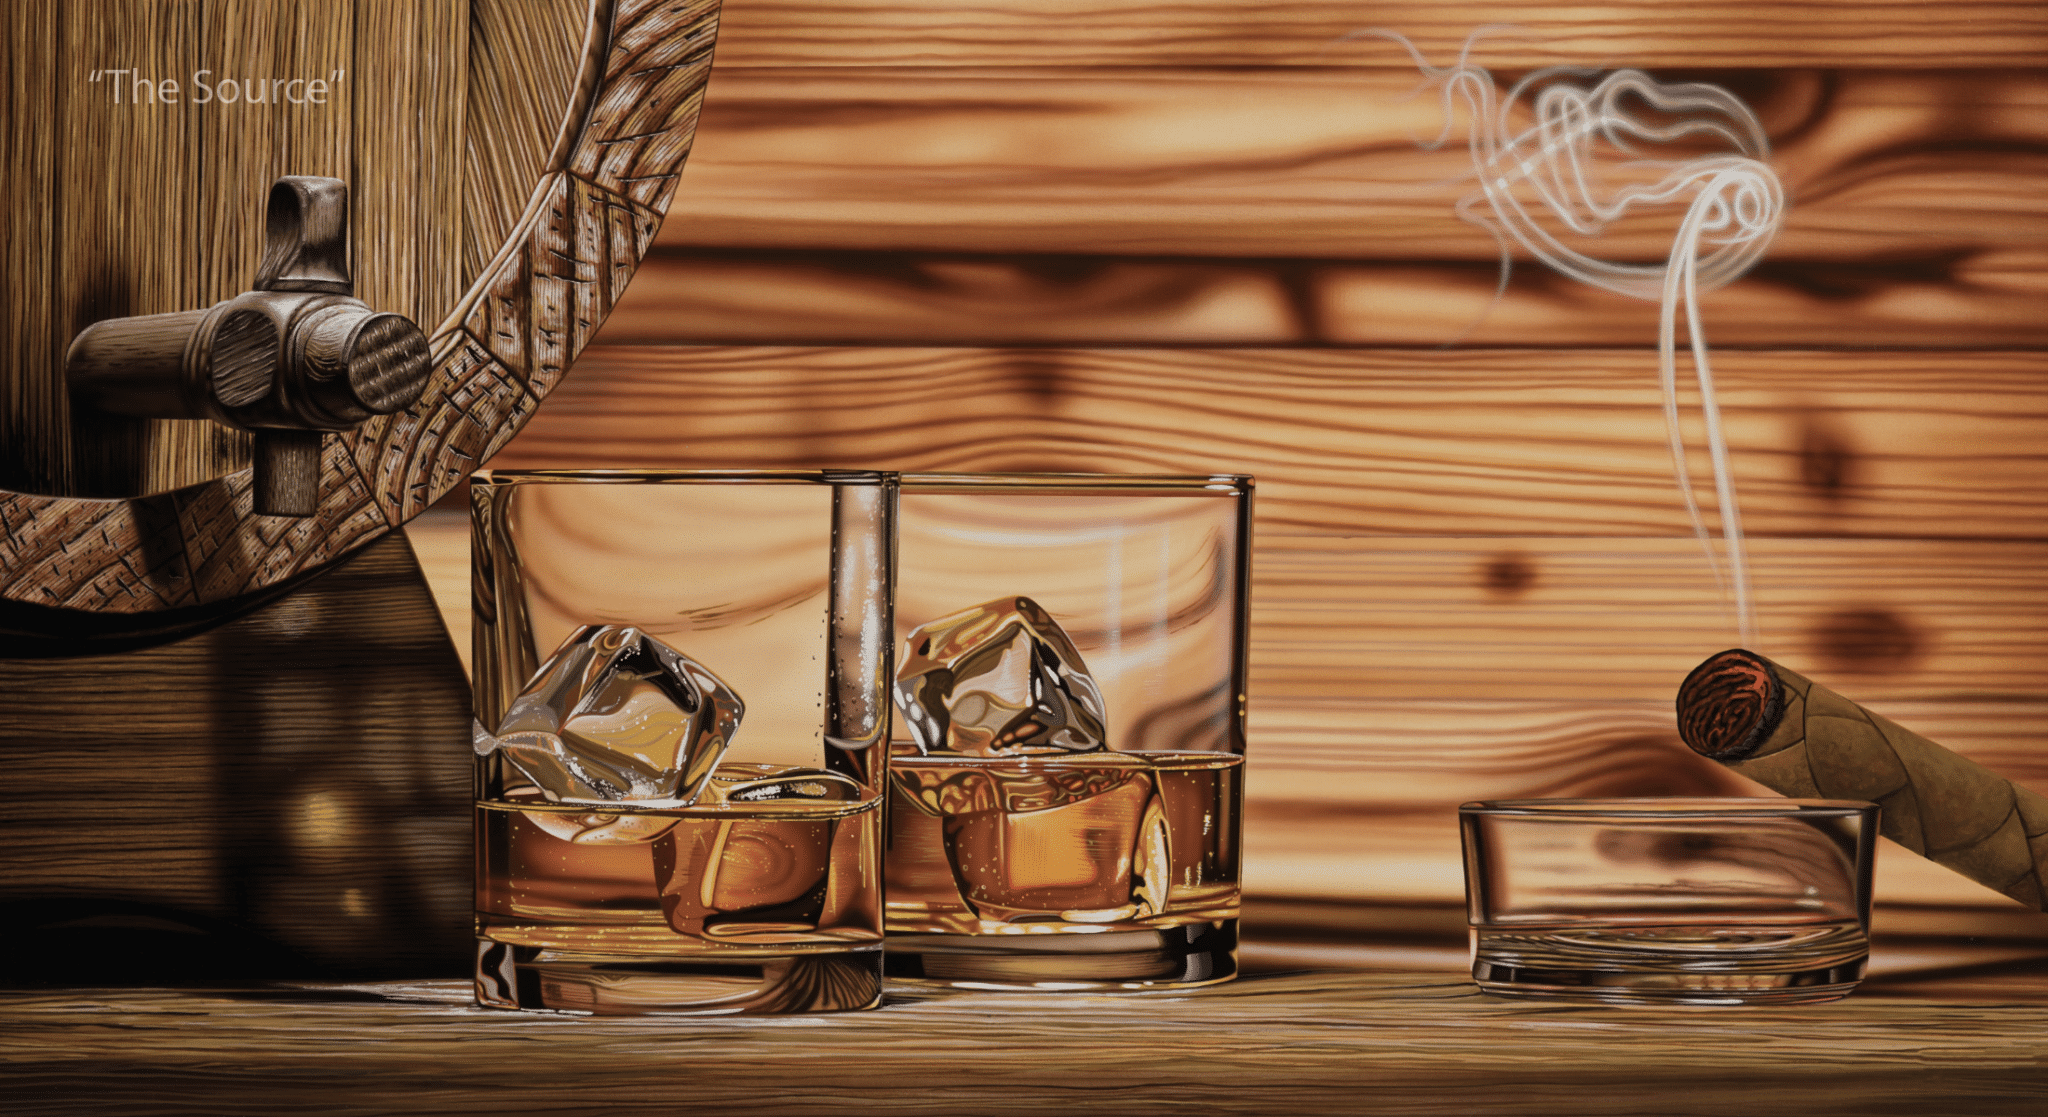 Scott Jacobs' beautiful whiskey and cigar painting, The Souce